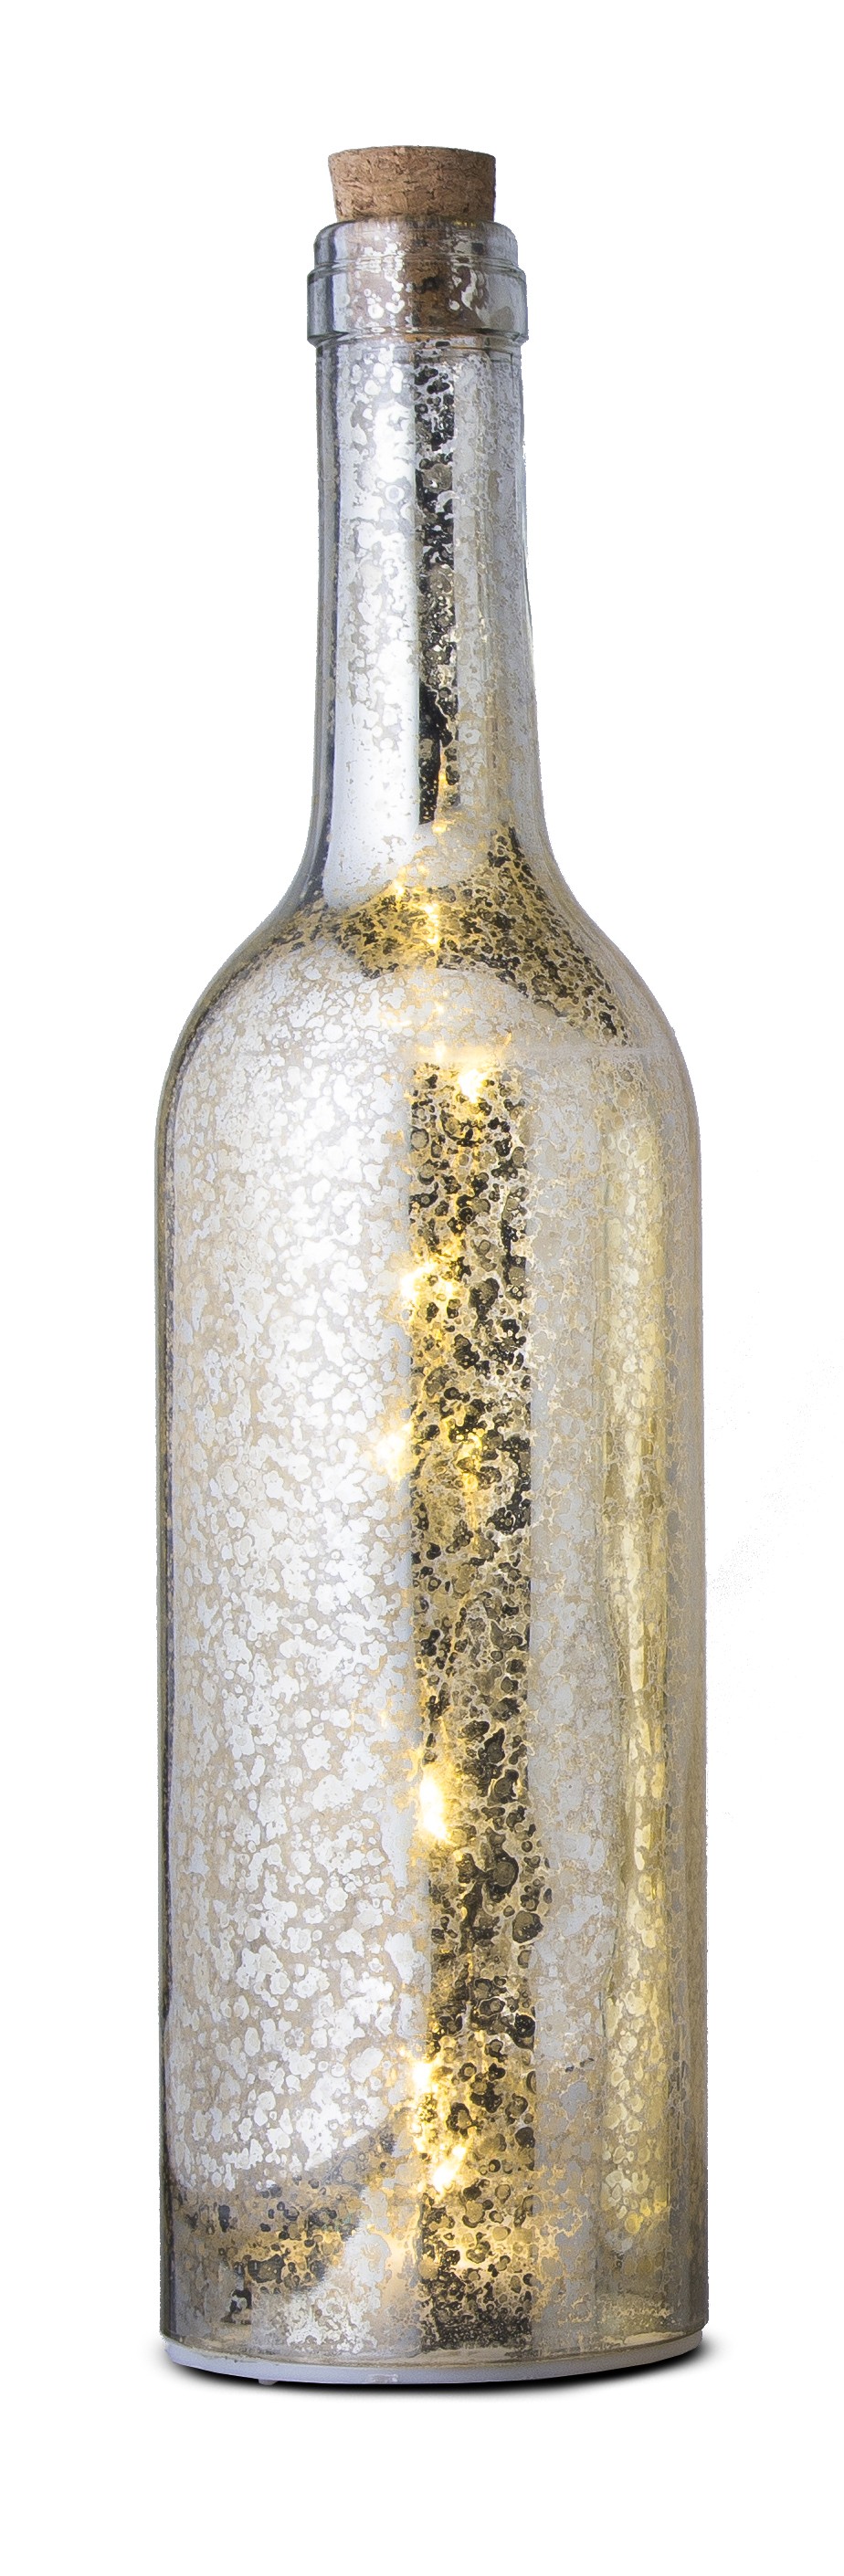 Glasflasche mit LED-Beleuchtung, sparkle-silber